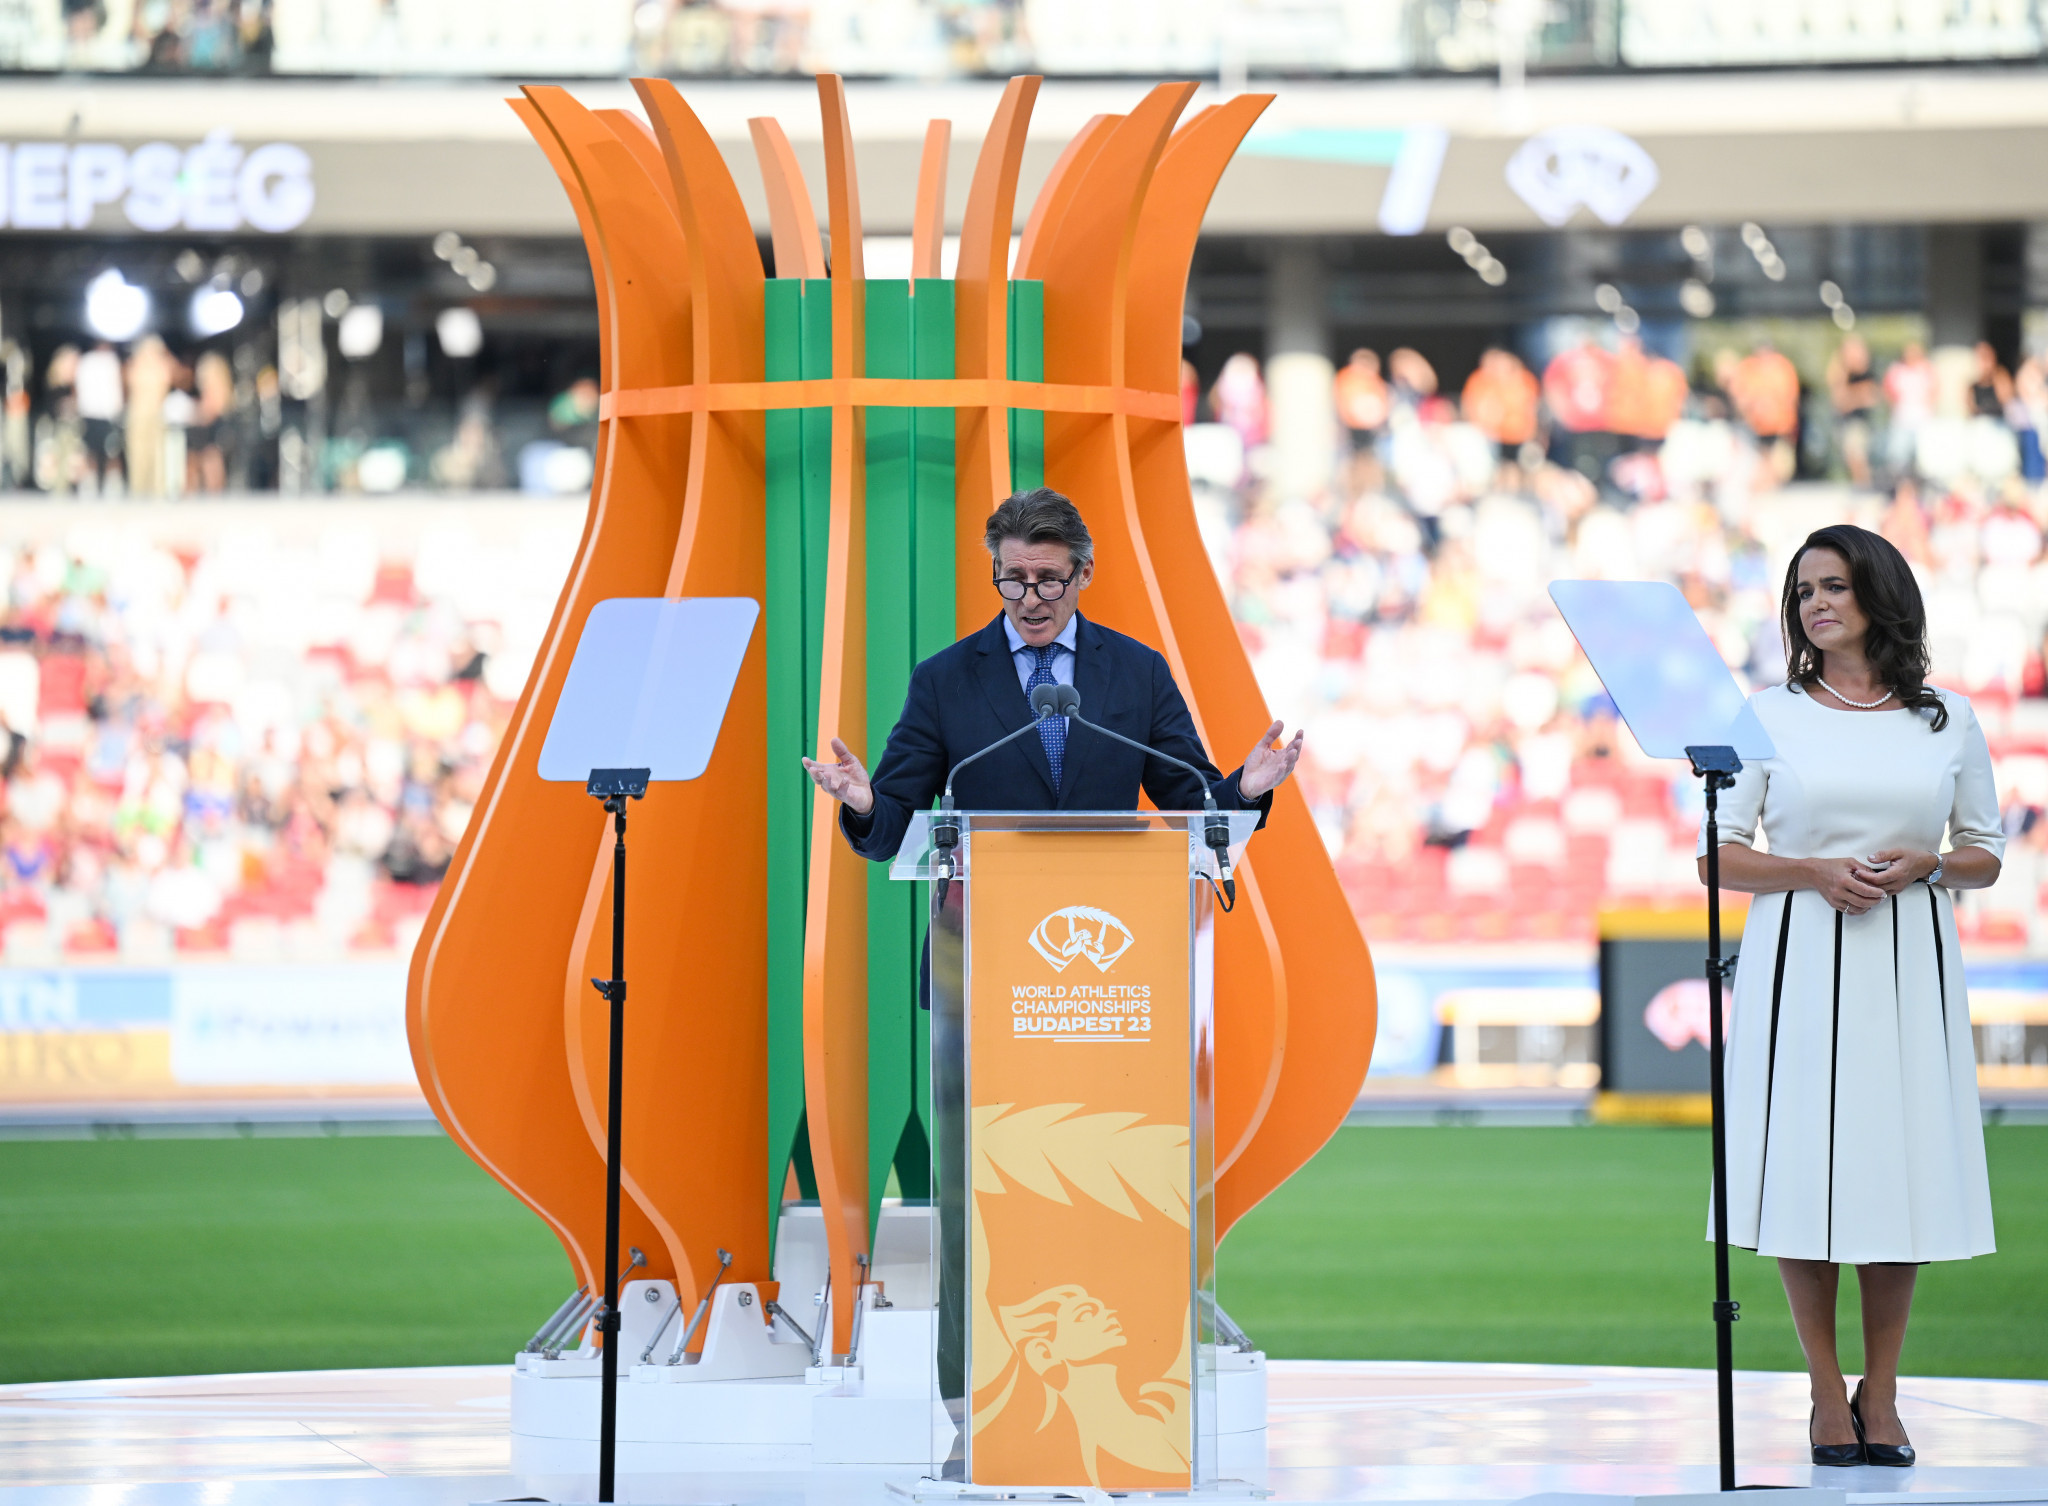 World Athletics President Sebastian Coe has been full of praise so far about the World Championships in Budapest ©Getty Images